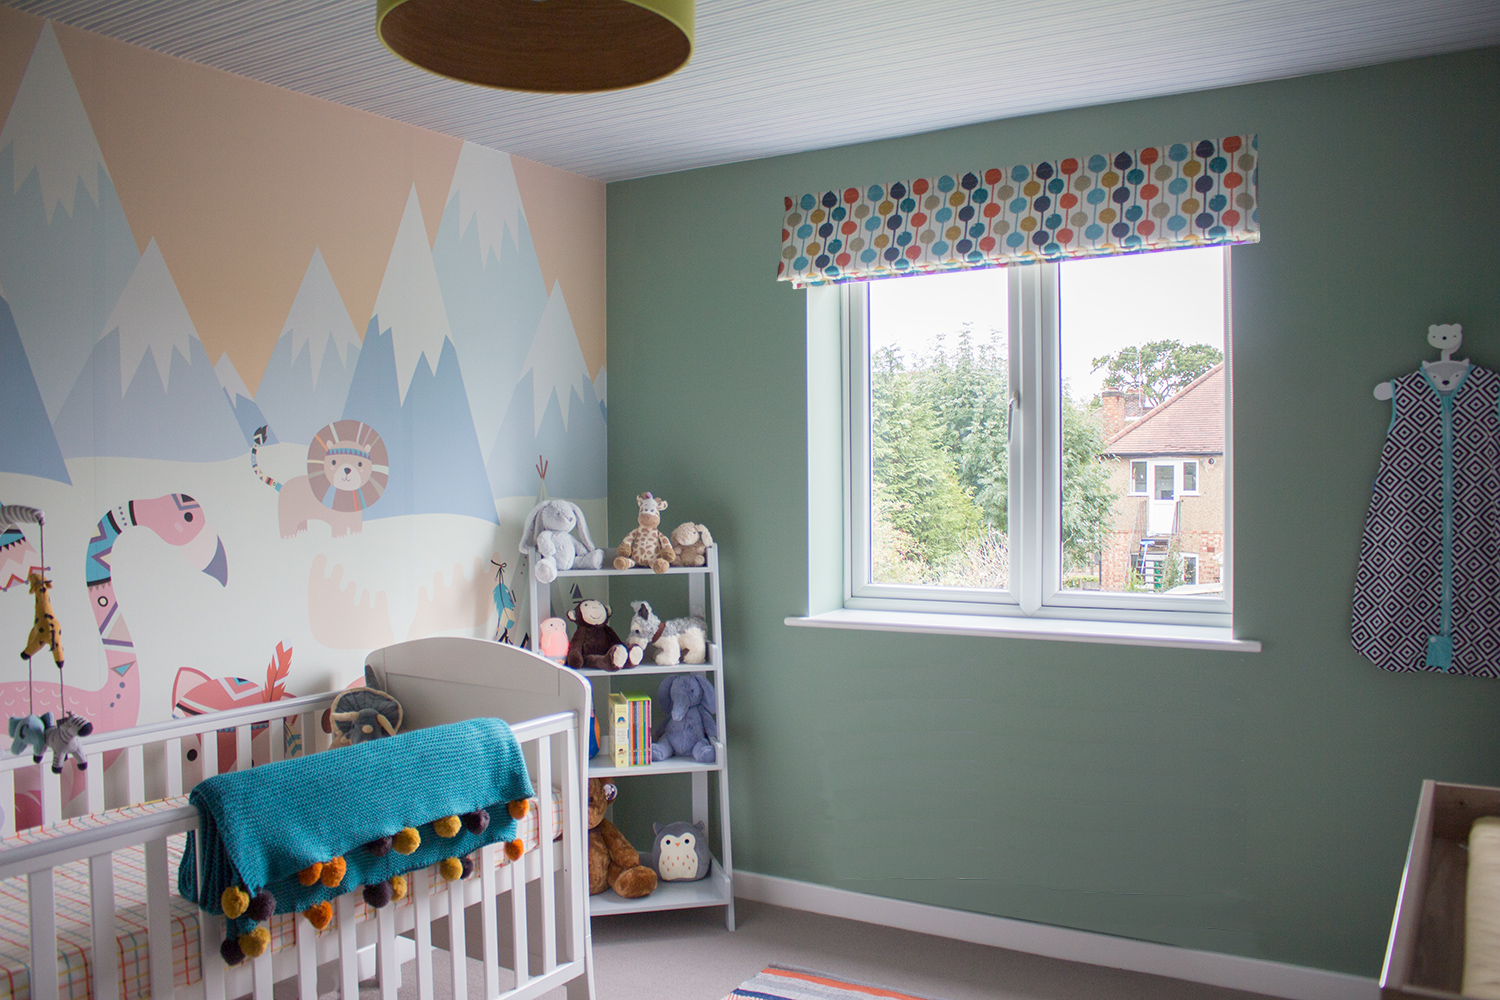 A photo of the new nursery with wallpaper mural